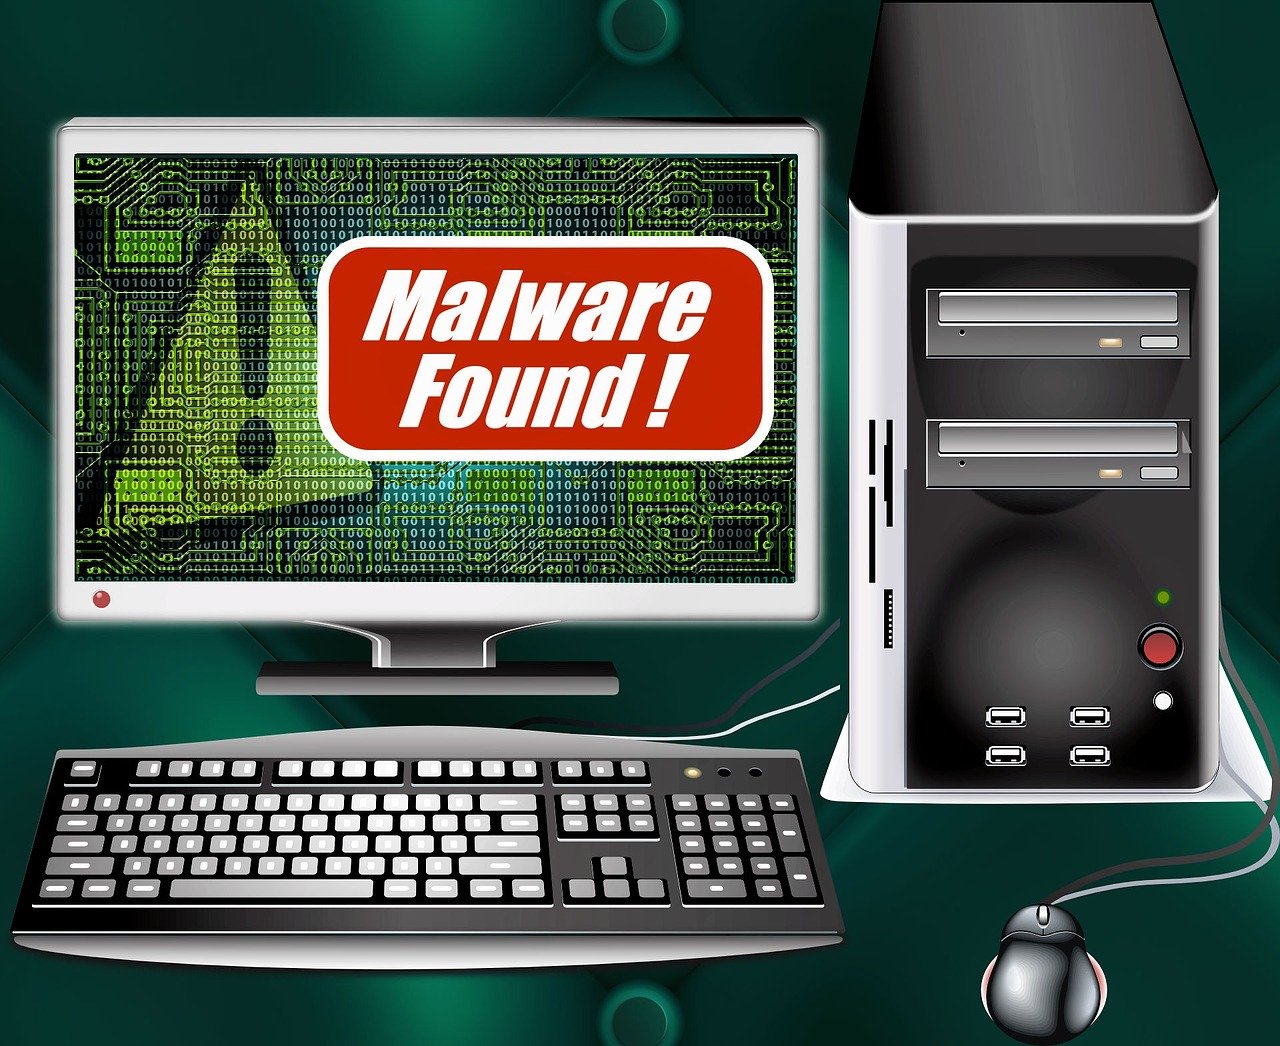 Malware Guide: What Is A Malware?